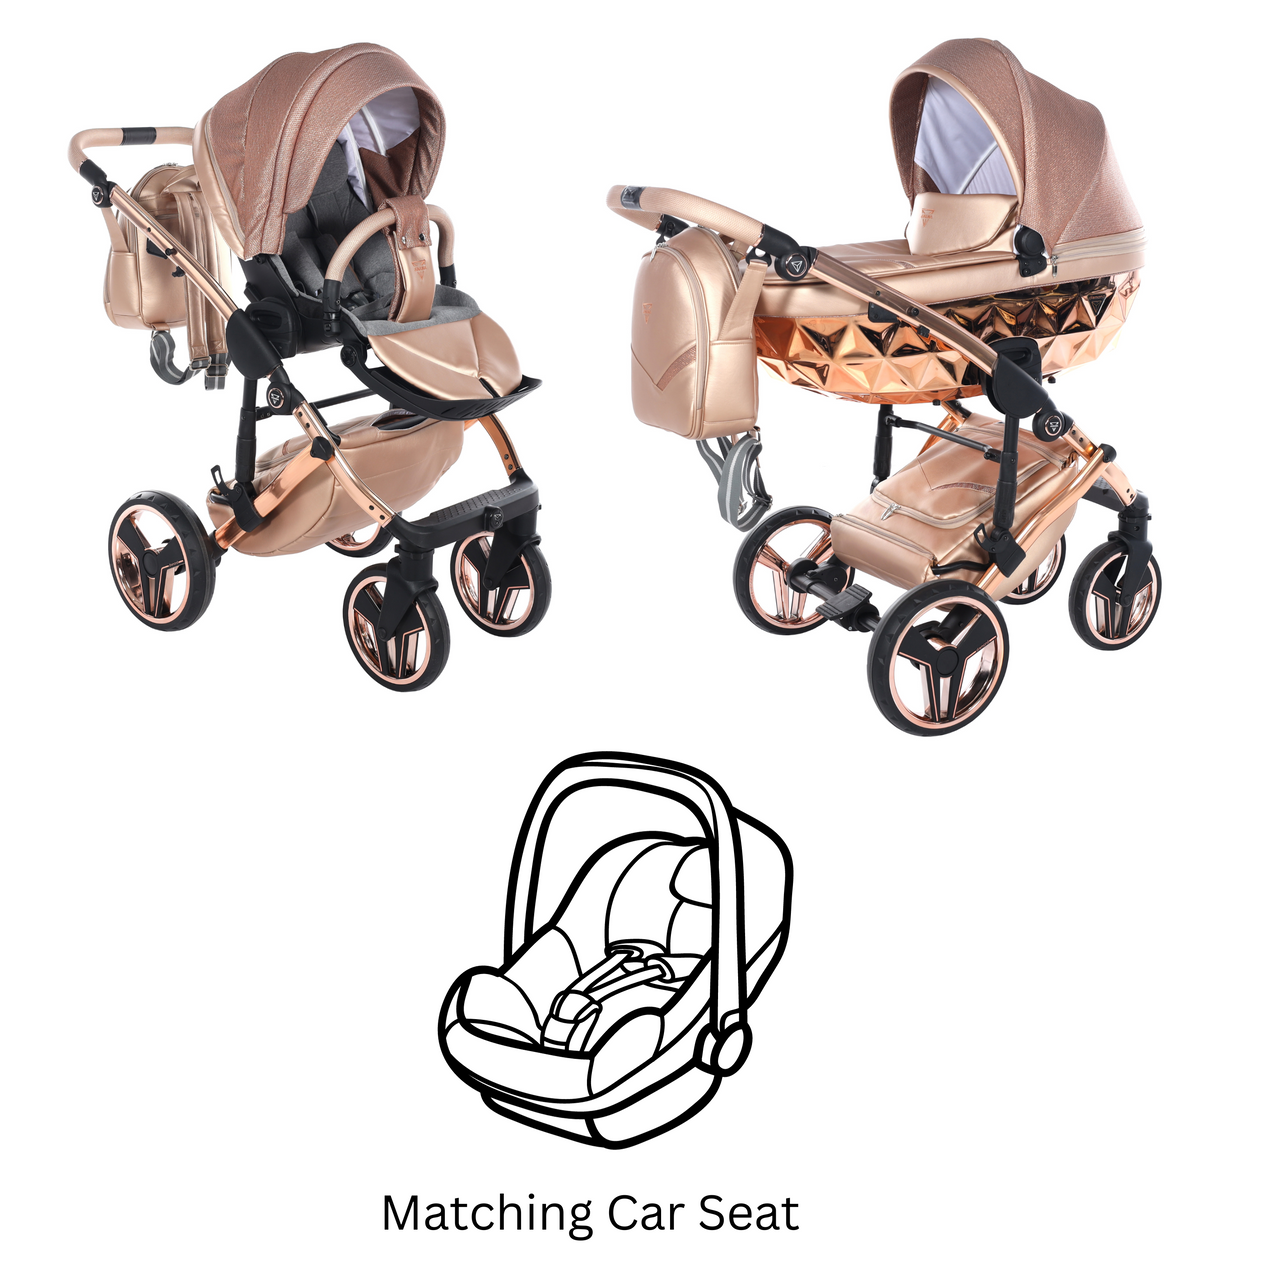 Junama Dolce 3 In 1 Travel System - Rose Gold - For Your Little One